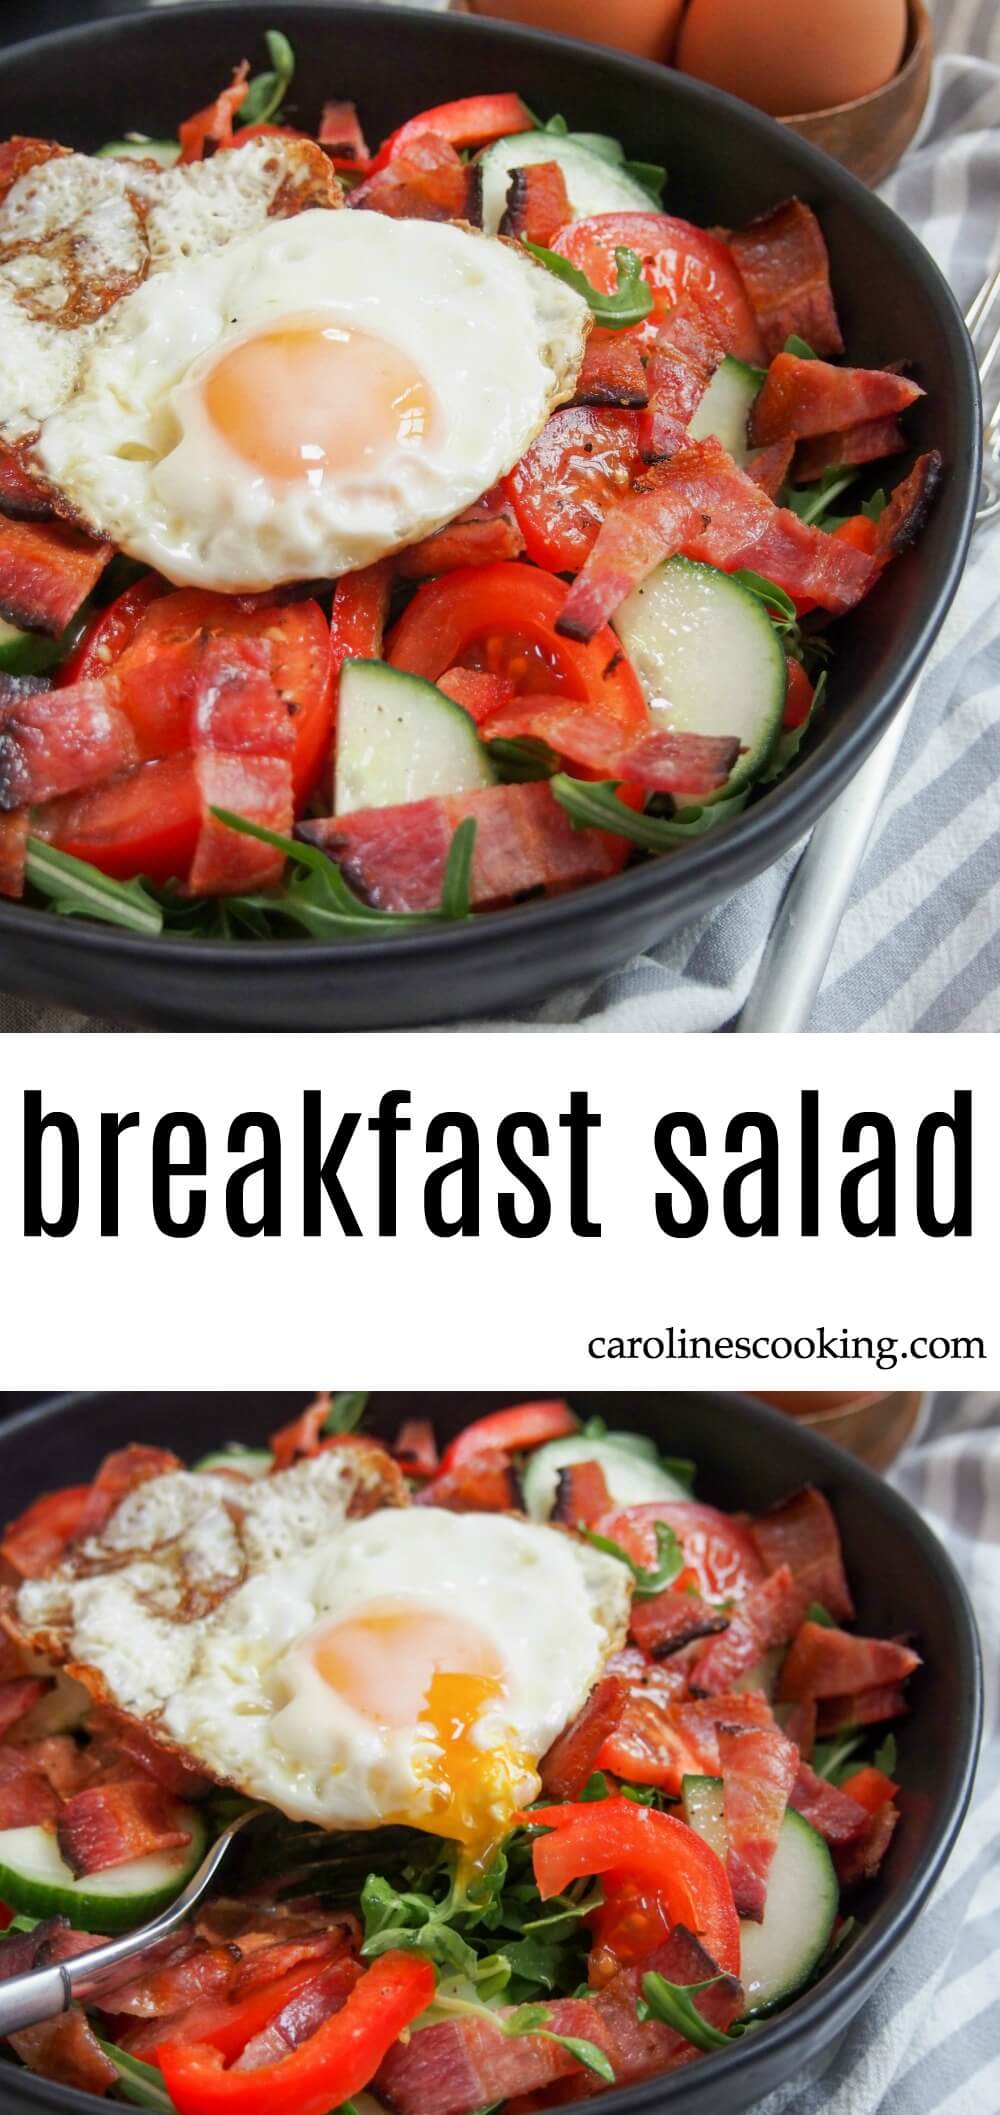 This breakfast salad is a tasty combination of a light salad, bacon and egg.  Easily customized and a great anytime meal.  It doesn't take long to prepare and while the basic recipe is pretty simple, there are lots of ideas to make it a bit different.  #ad #brunchweek #salad #breakfastfordinner #bacon #brunch